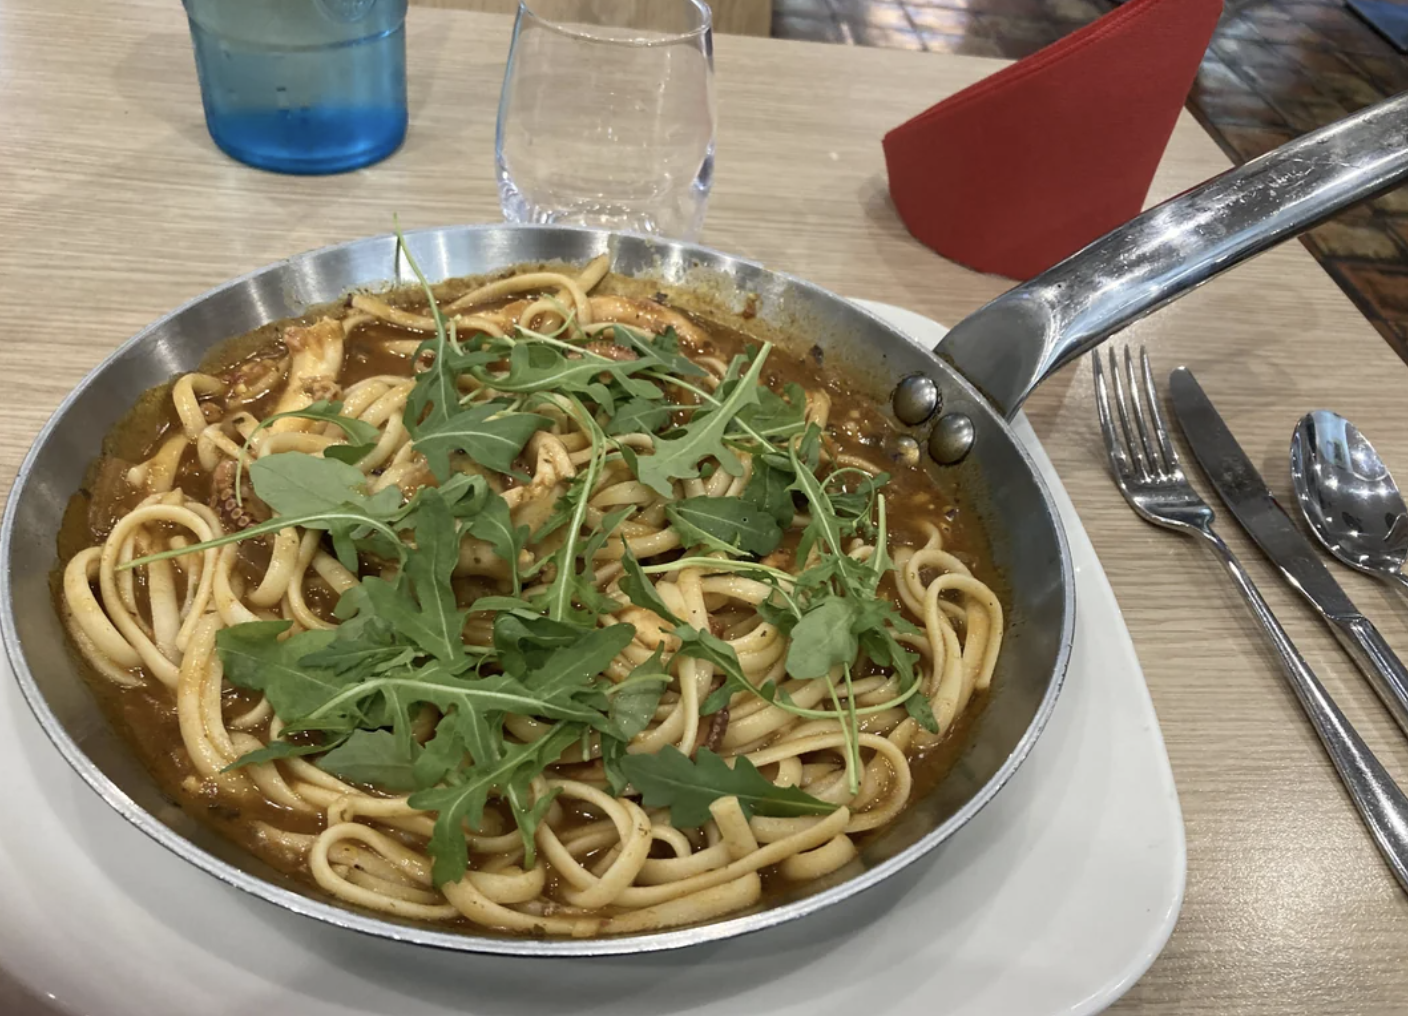 Pasta dish with sauce and herbs served in a pan on a wooden table, with cutlery and glasses on the side